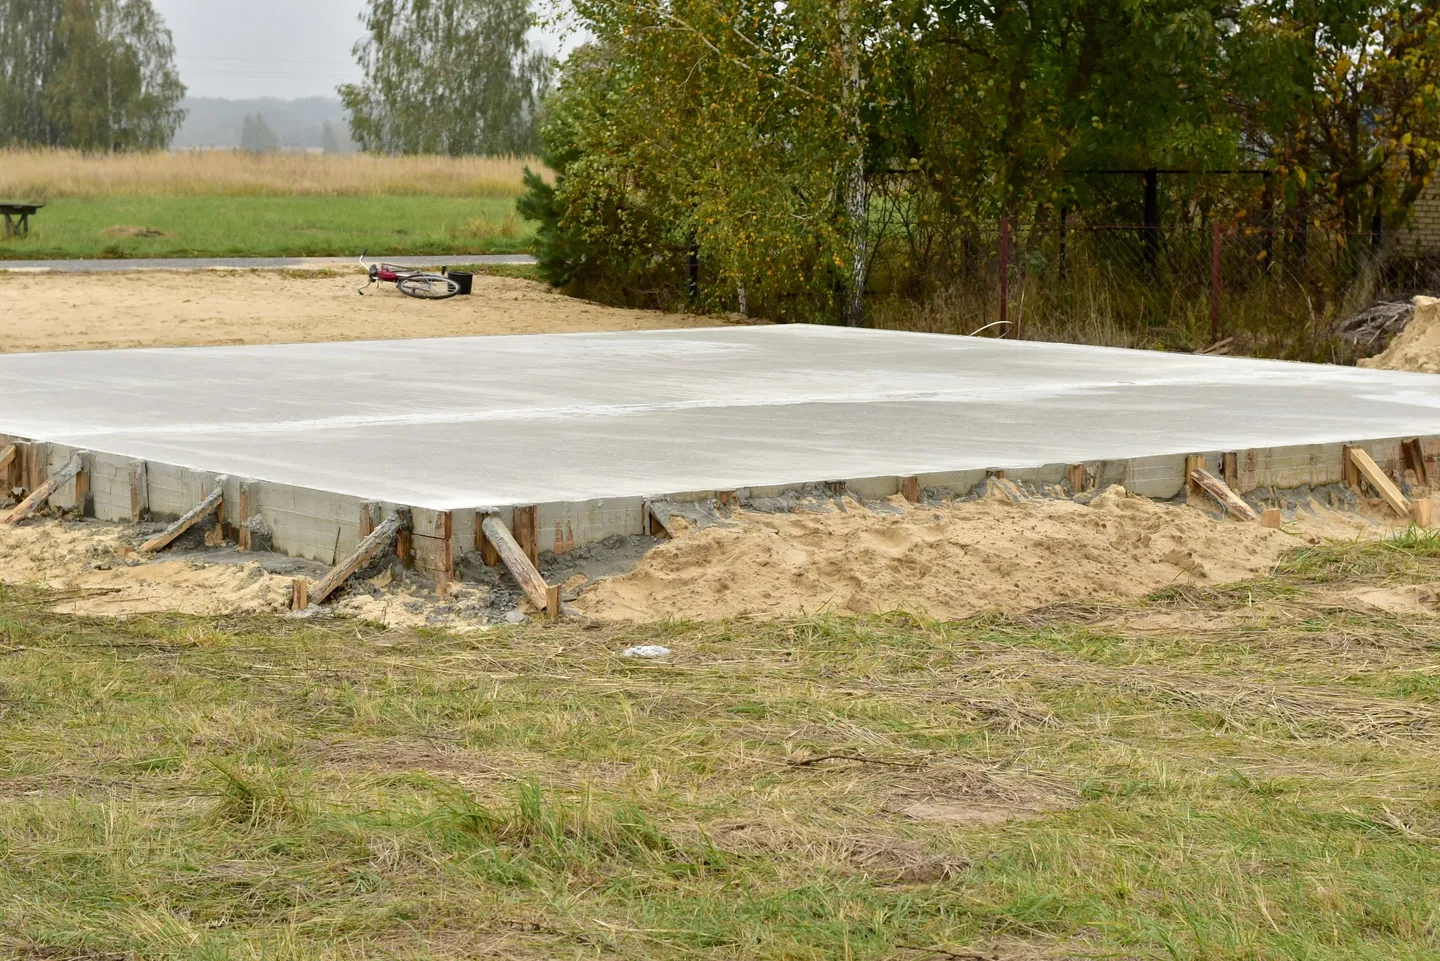 A large sheet of plastic covering the ground.